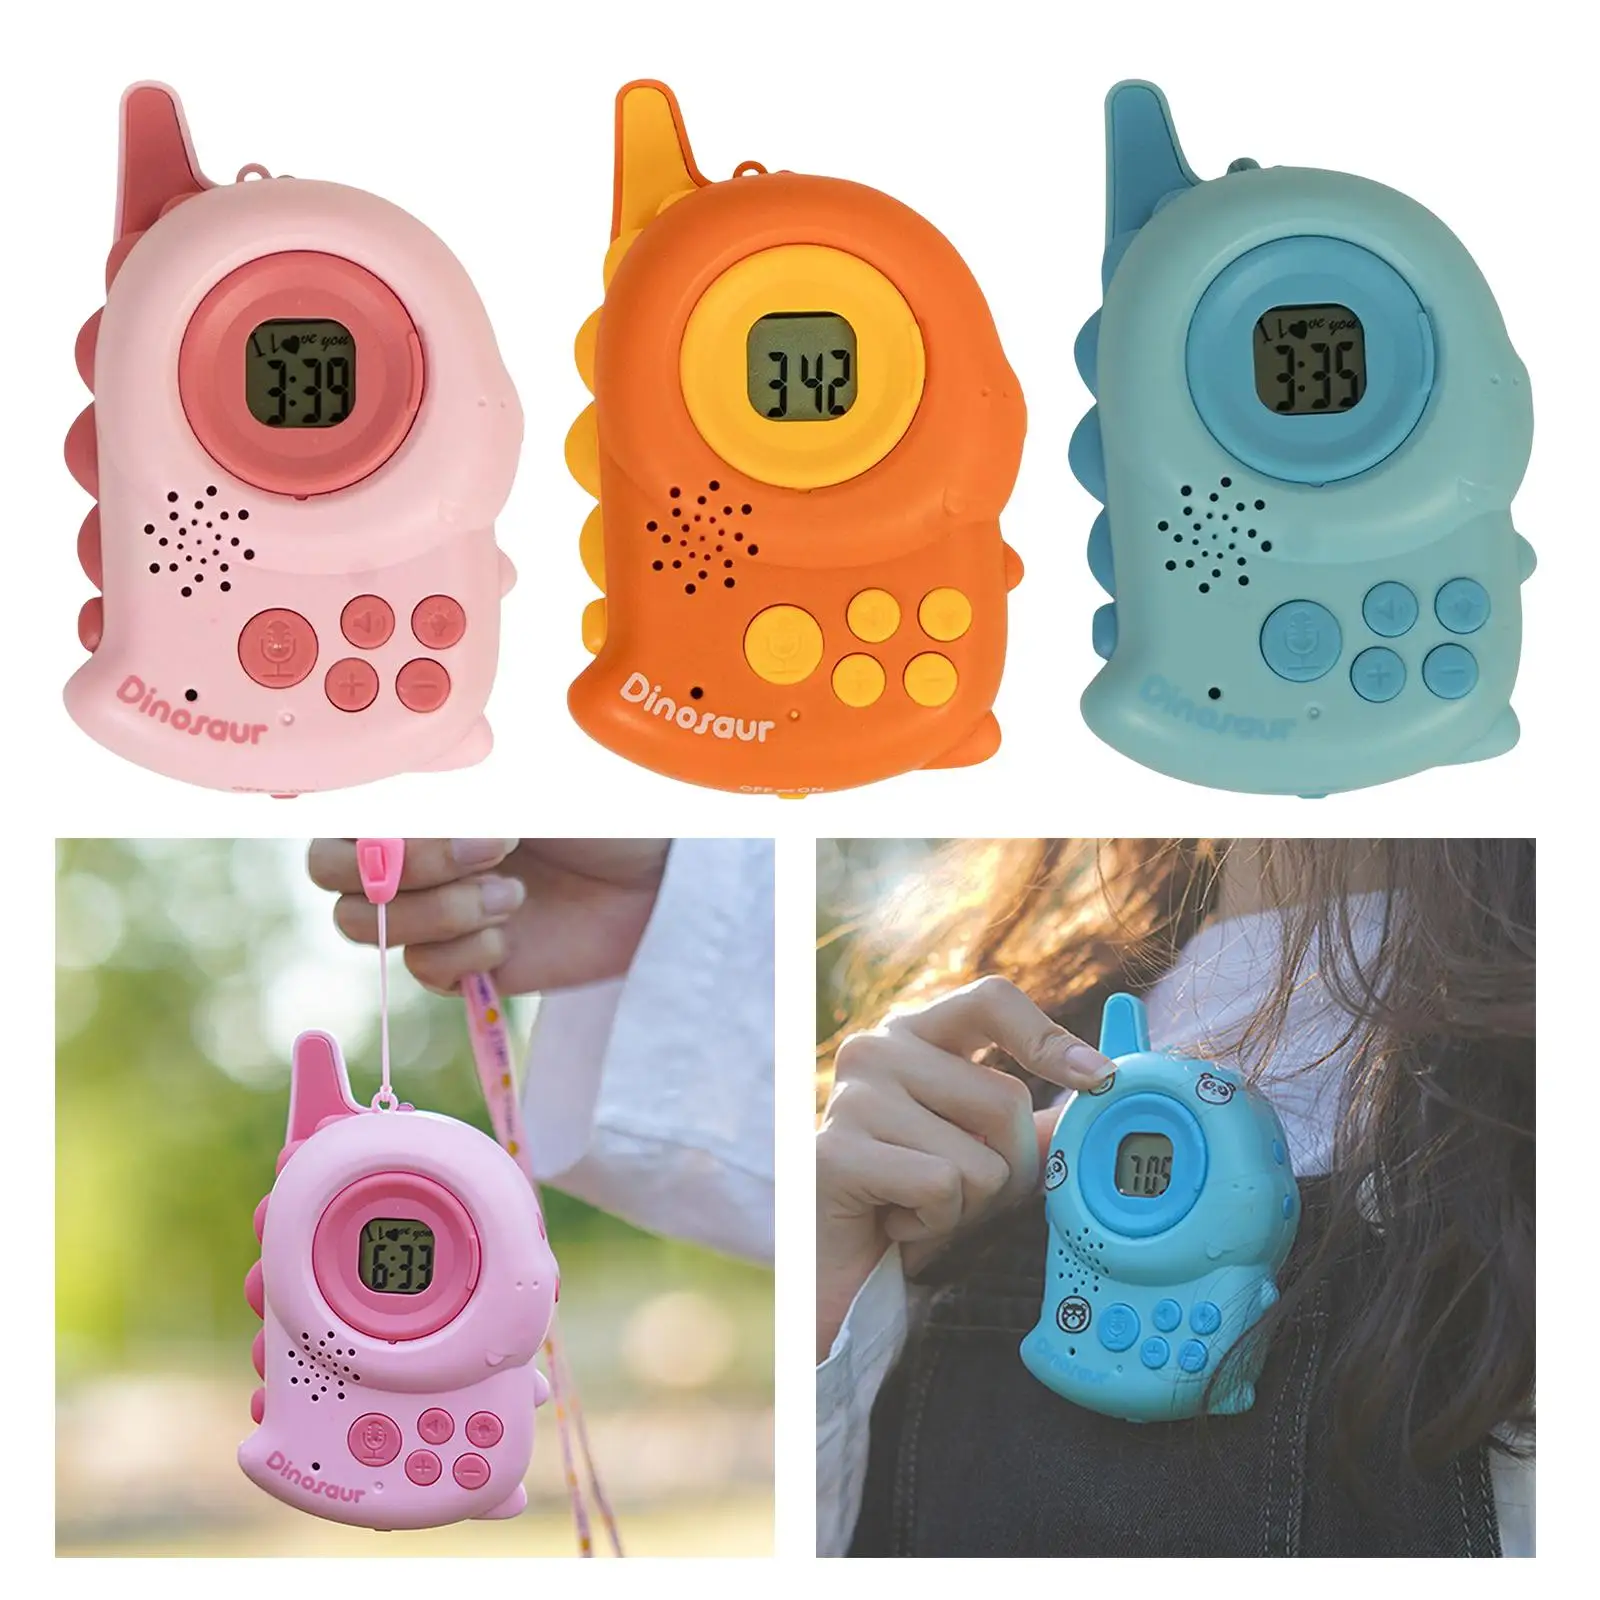 Handheld Walkie Talkies for Kids Adorable Indoor Outdoor Toys Outdoor Camping Games for Spring Summer Outside Boys Girls Gifts